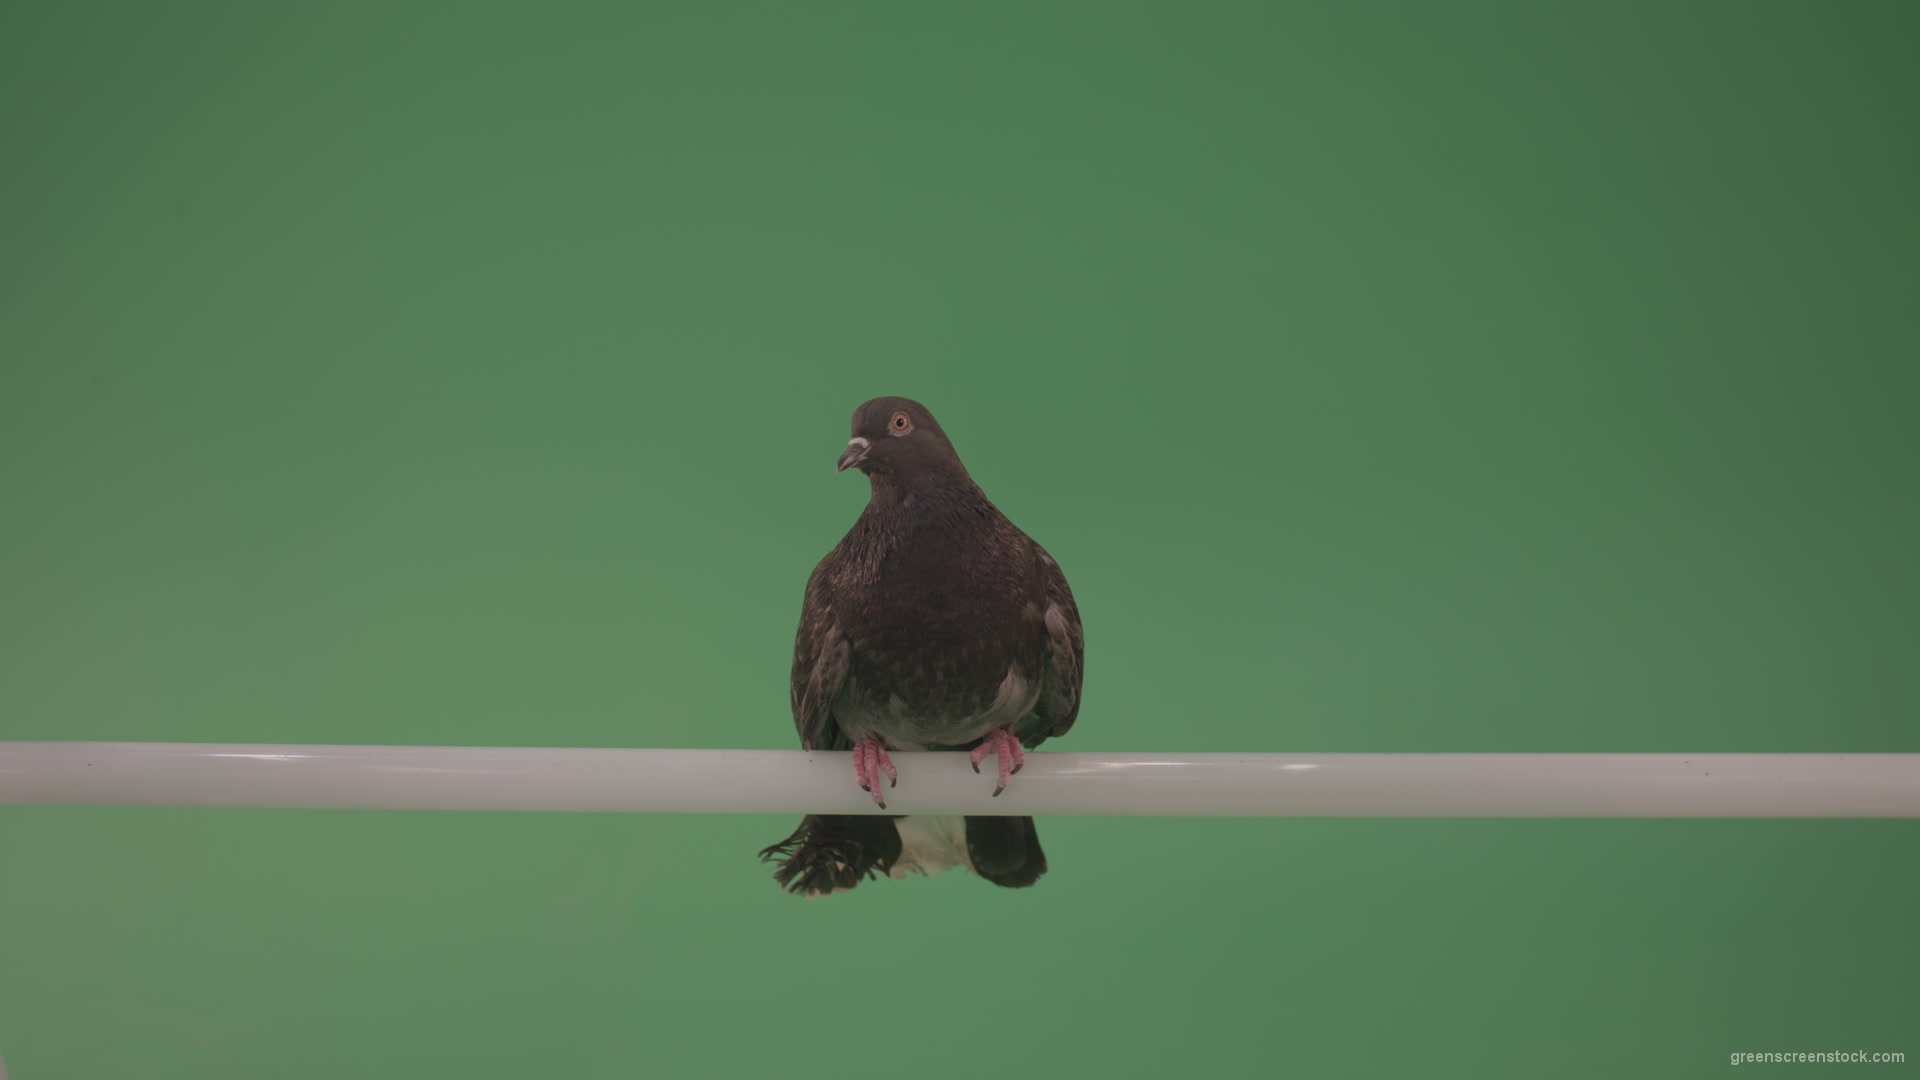 Wild-bird-doves-sit-on-the-branch-and-peer-around-isolated-on-green-screen_005 Green Screen Stock